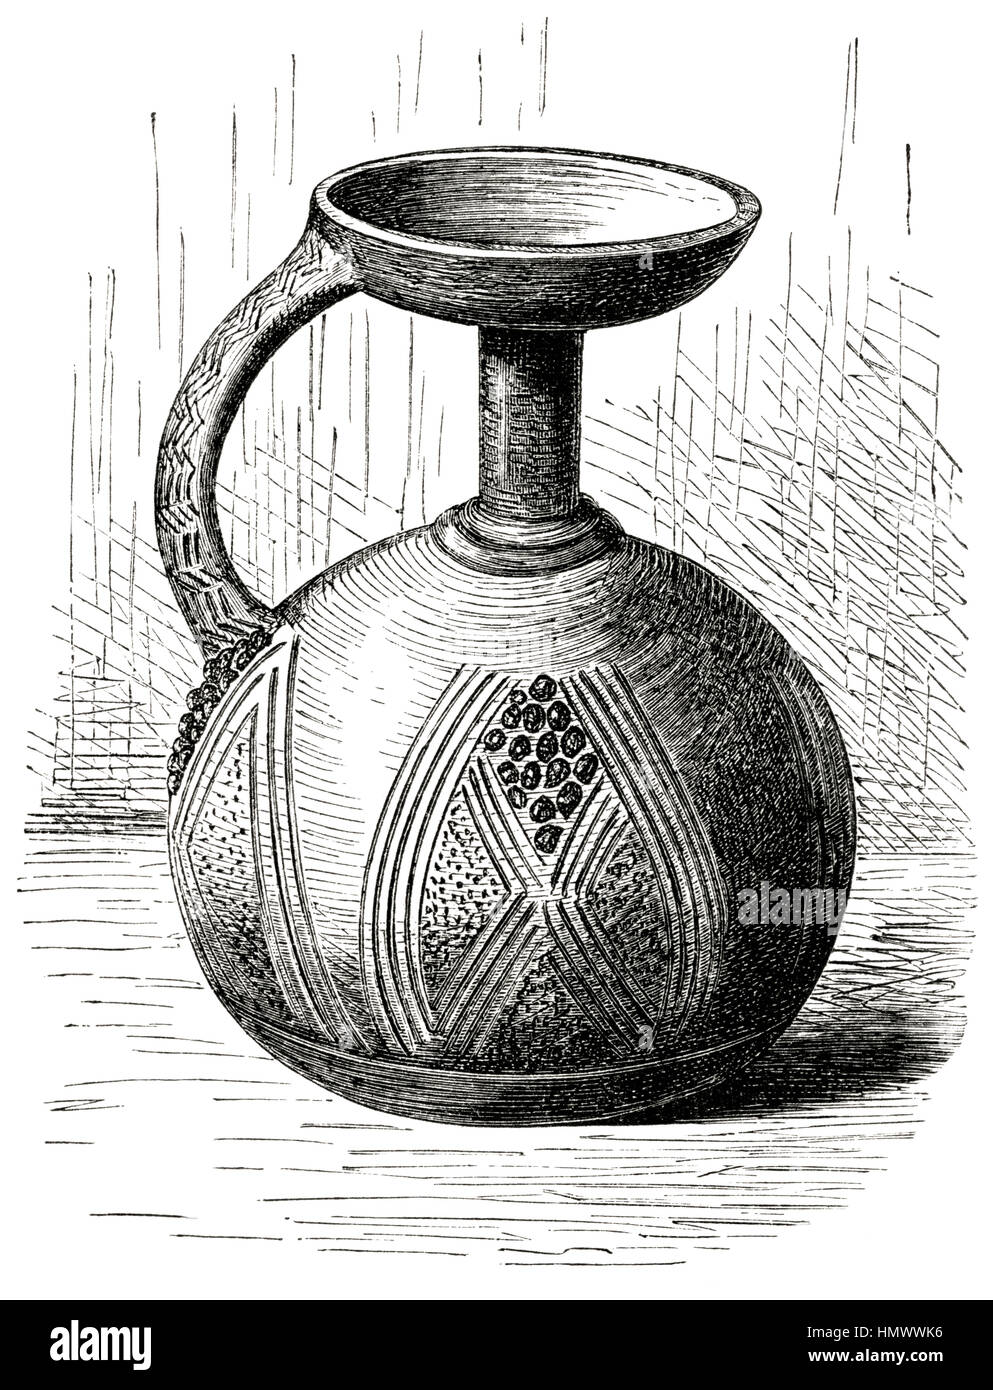 Clay Vessel from Lower Niger, Africa, Illustration from the book, 'Volkerkunde' by Dr. Fredrich Ratzel, Bibliographisches Institut, Leipzig, 1885 Stock Photo